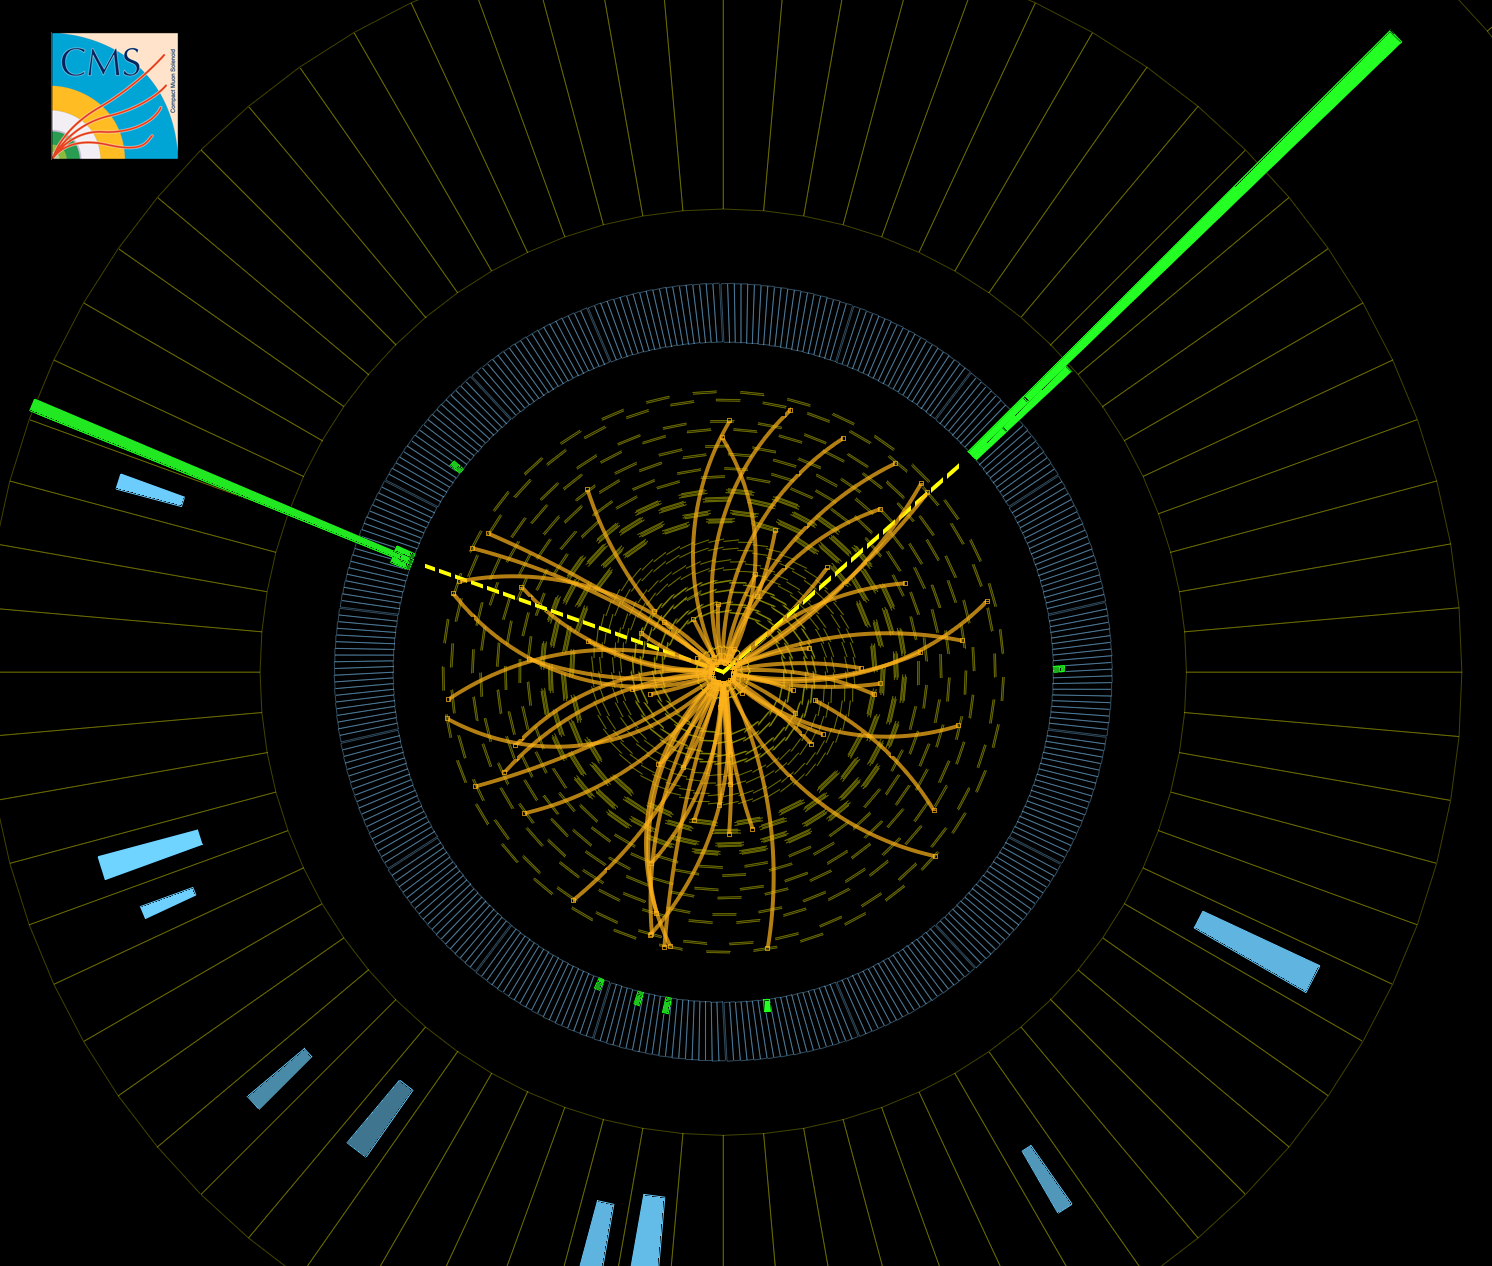 Event recorded with the CMS detector in 2012 at a proton-proton centre of mass energy of 8 TeV. The event shows characteristics expected from the decay of the SM Higgs boson to a pair of photons (dashed yellow lines and green towers). The event could also be due to known standard model background processes.